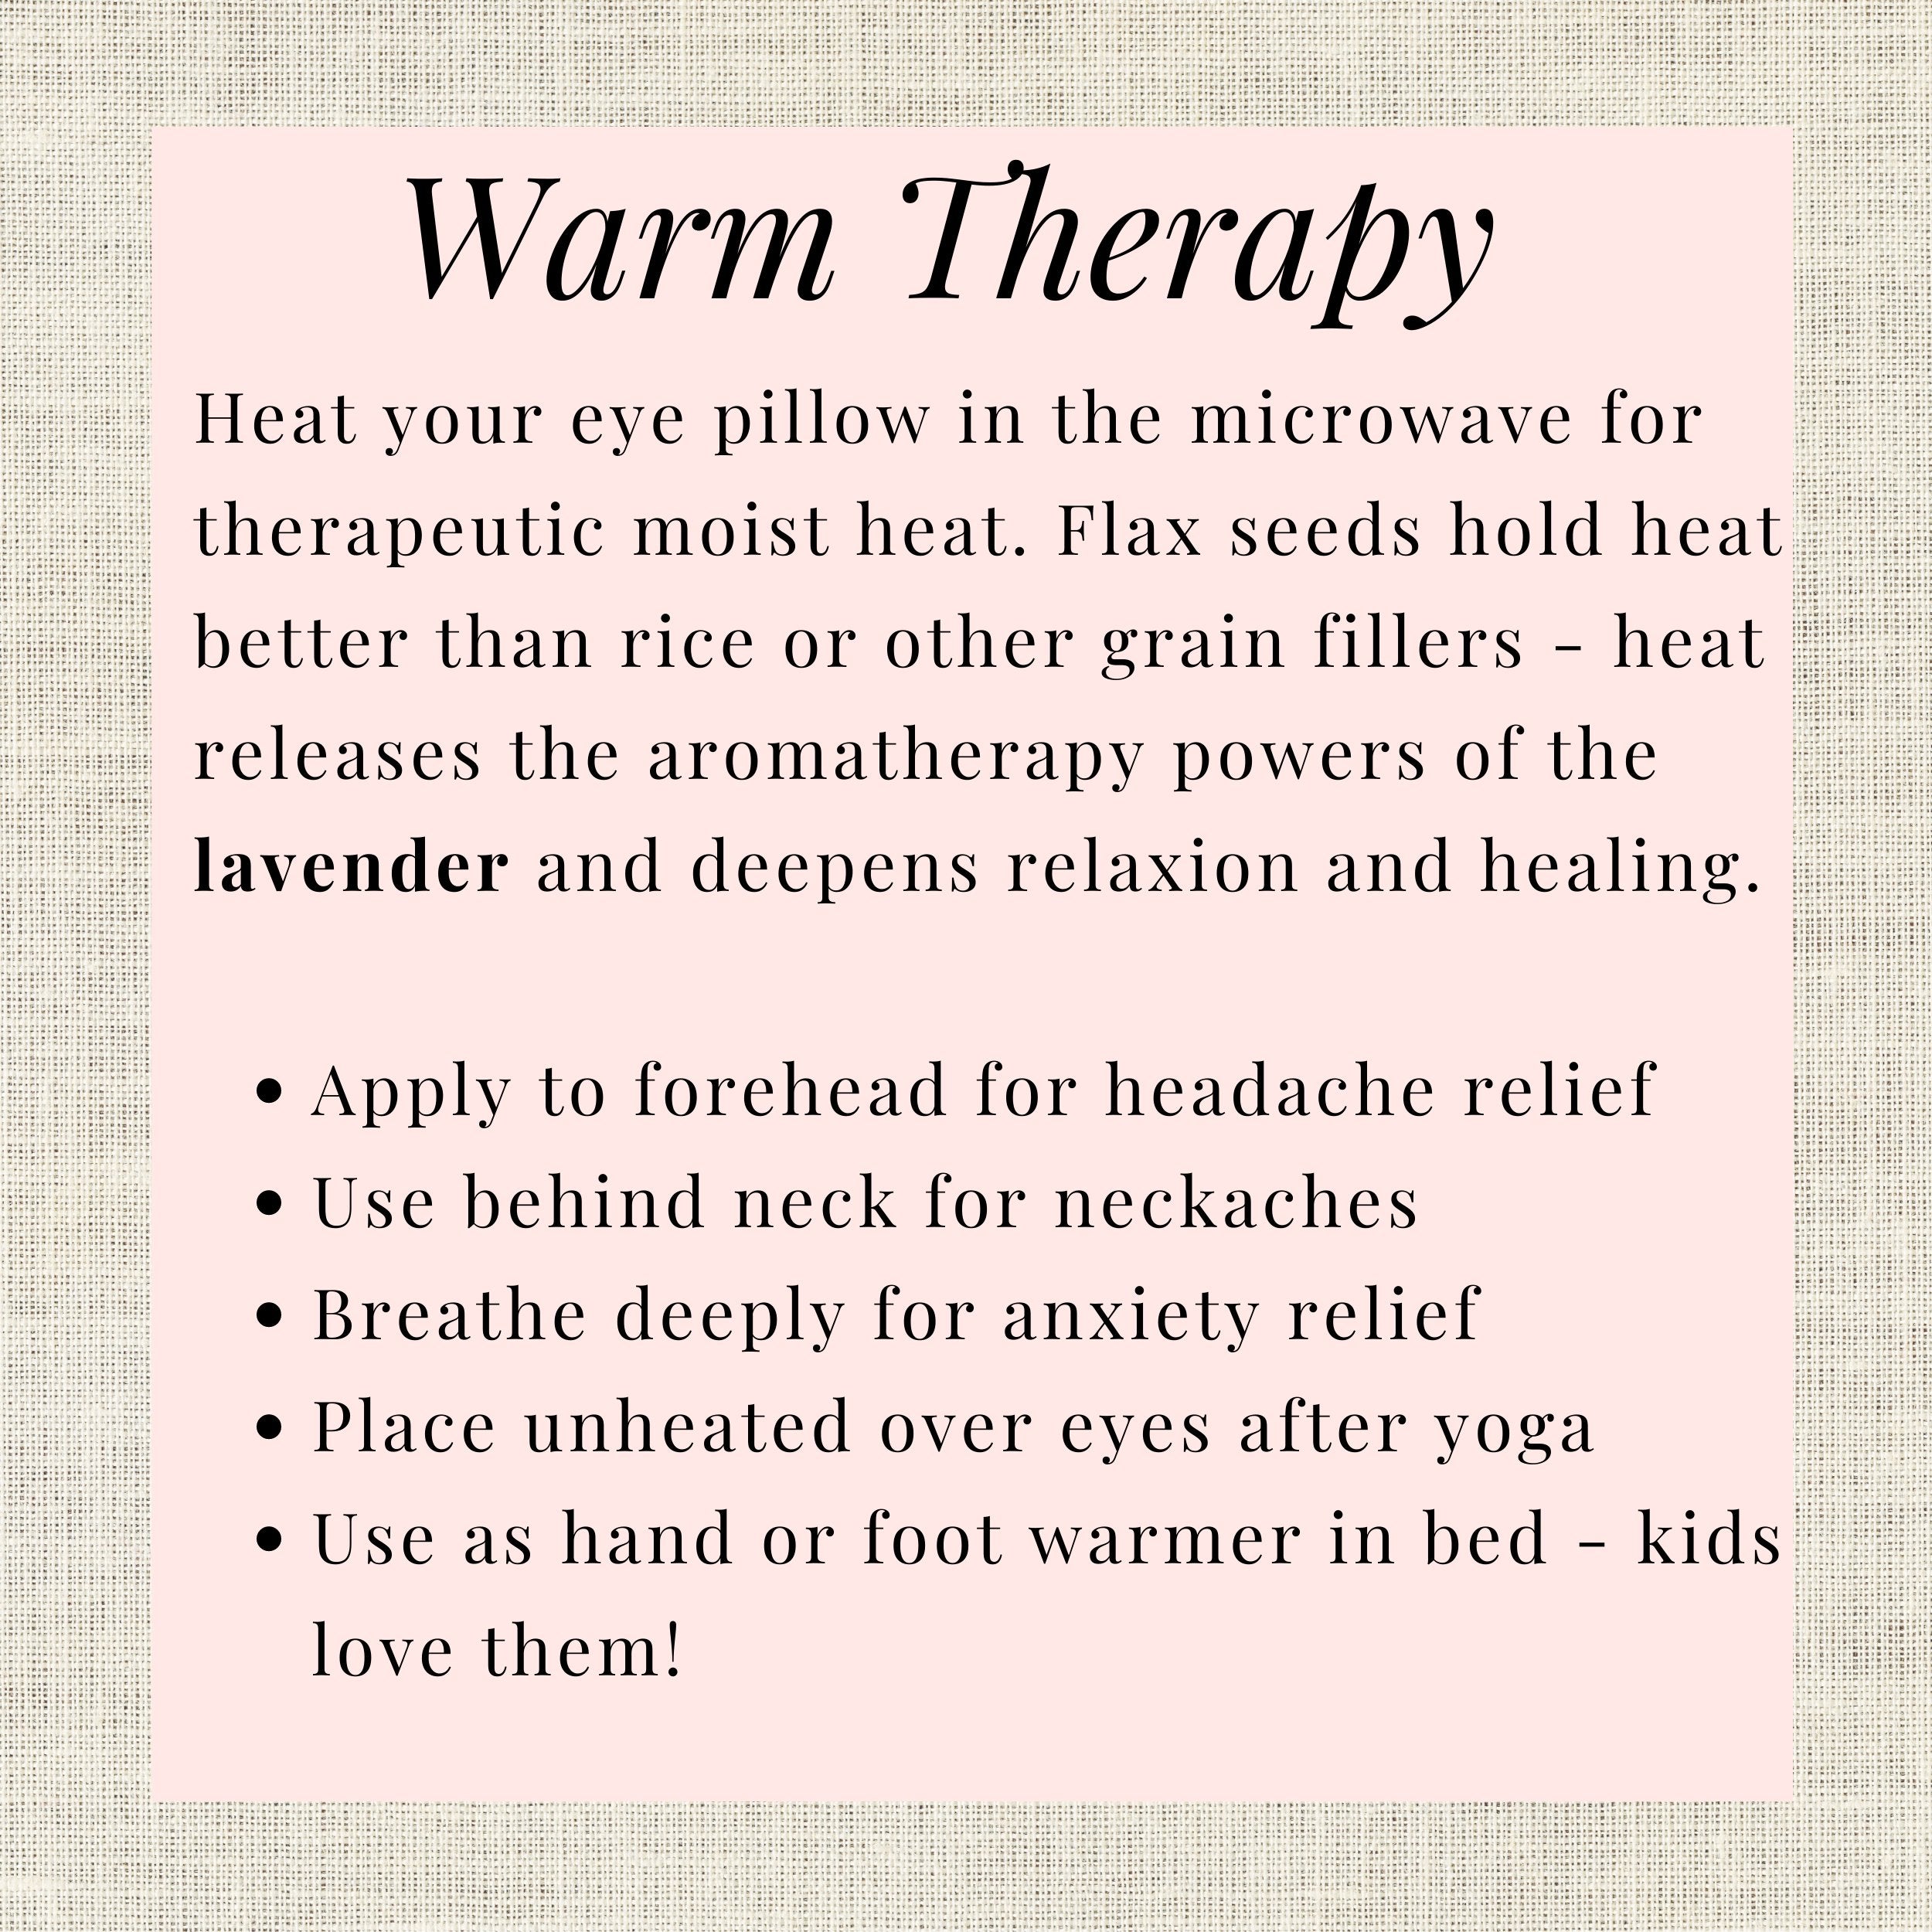 Detailed instructions for warm therapy use